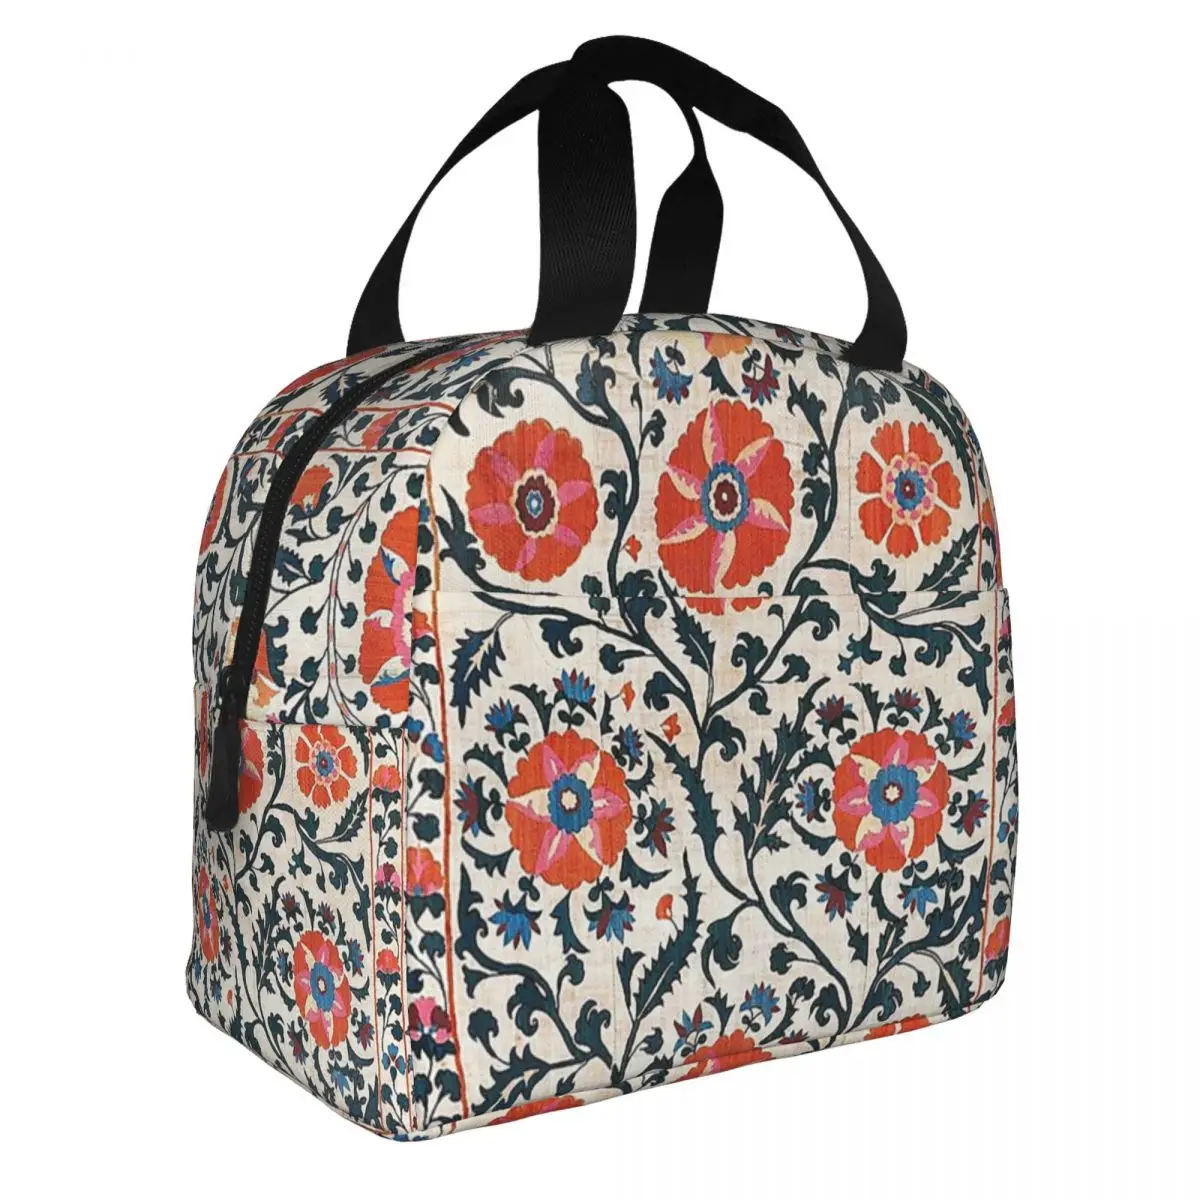 Lunch Bags for Women Kids Antique Boho Bohemian Floral Thermal Cooler Portable Picnic Oxford Lunch Box Handbags